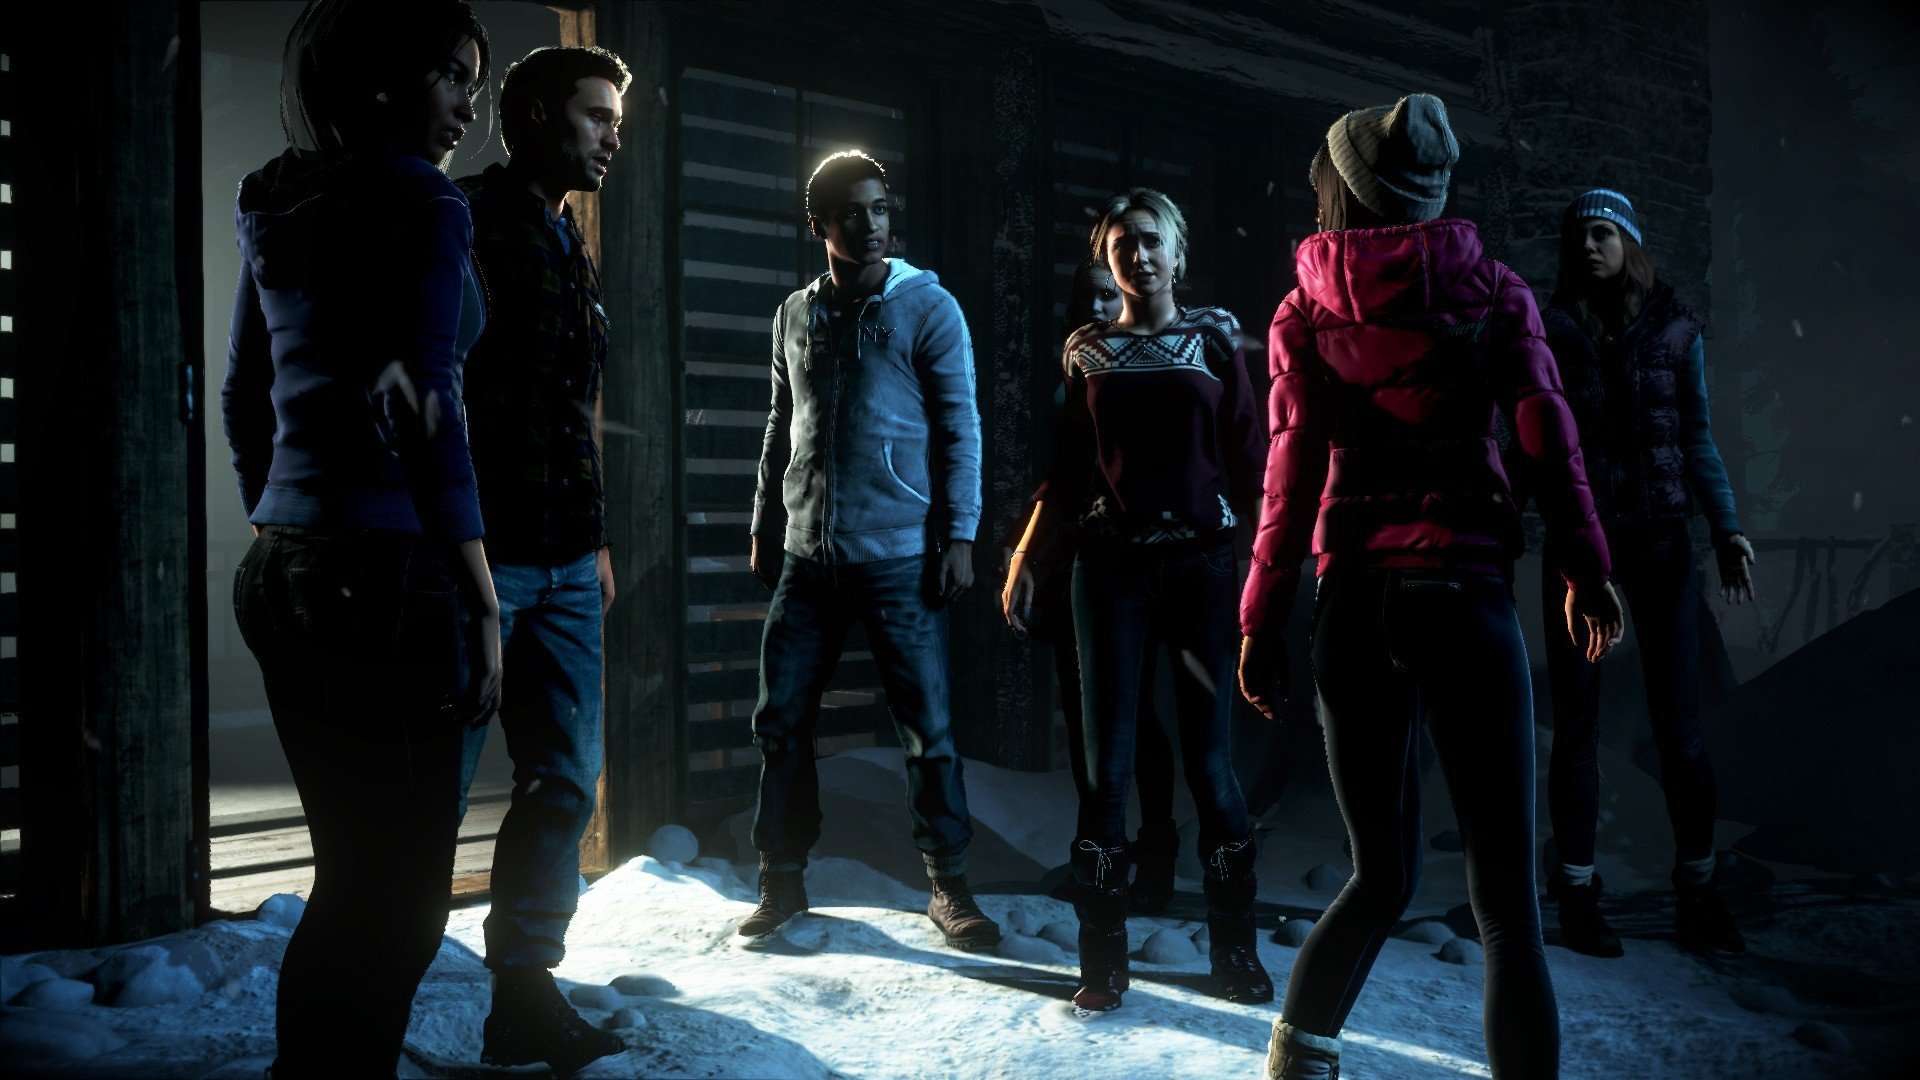 A New PS4 Exclusive: Until Dawn